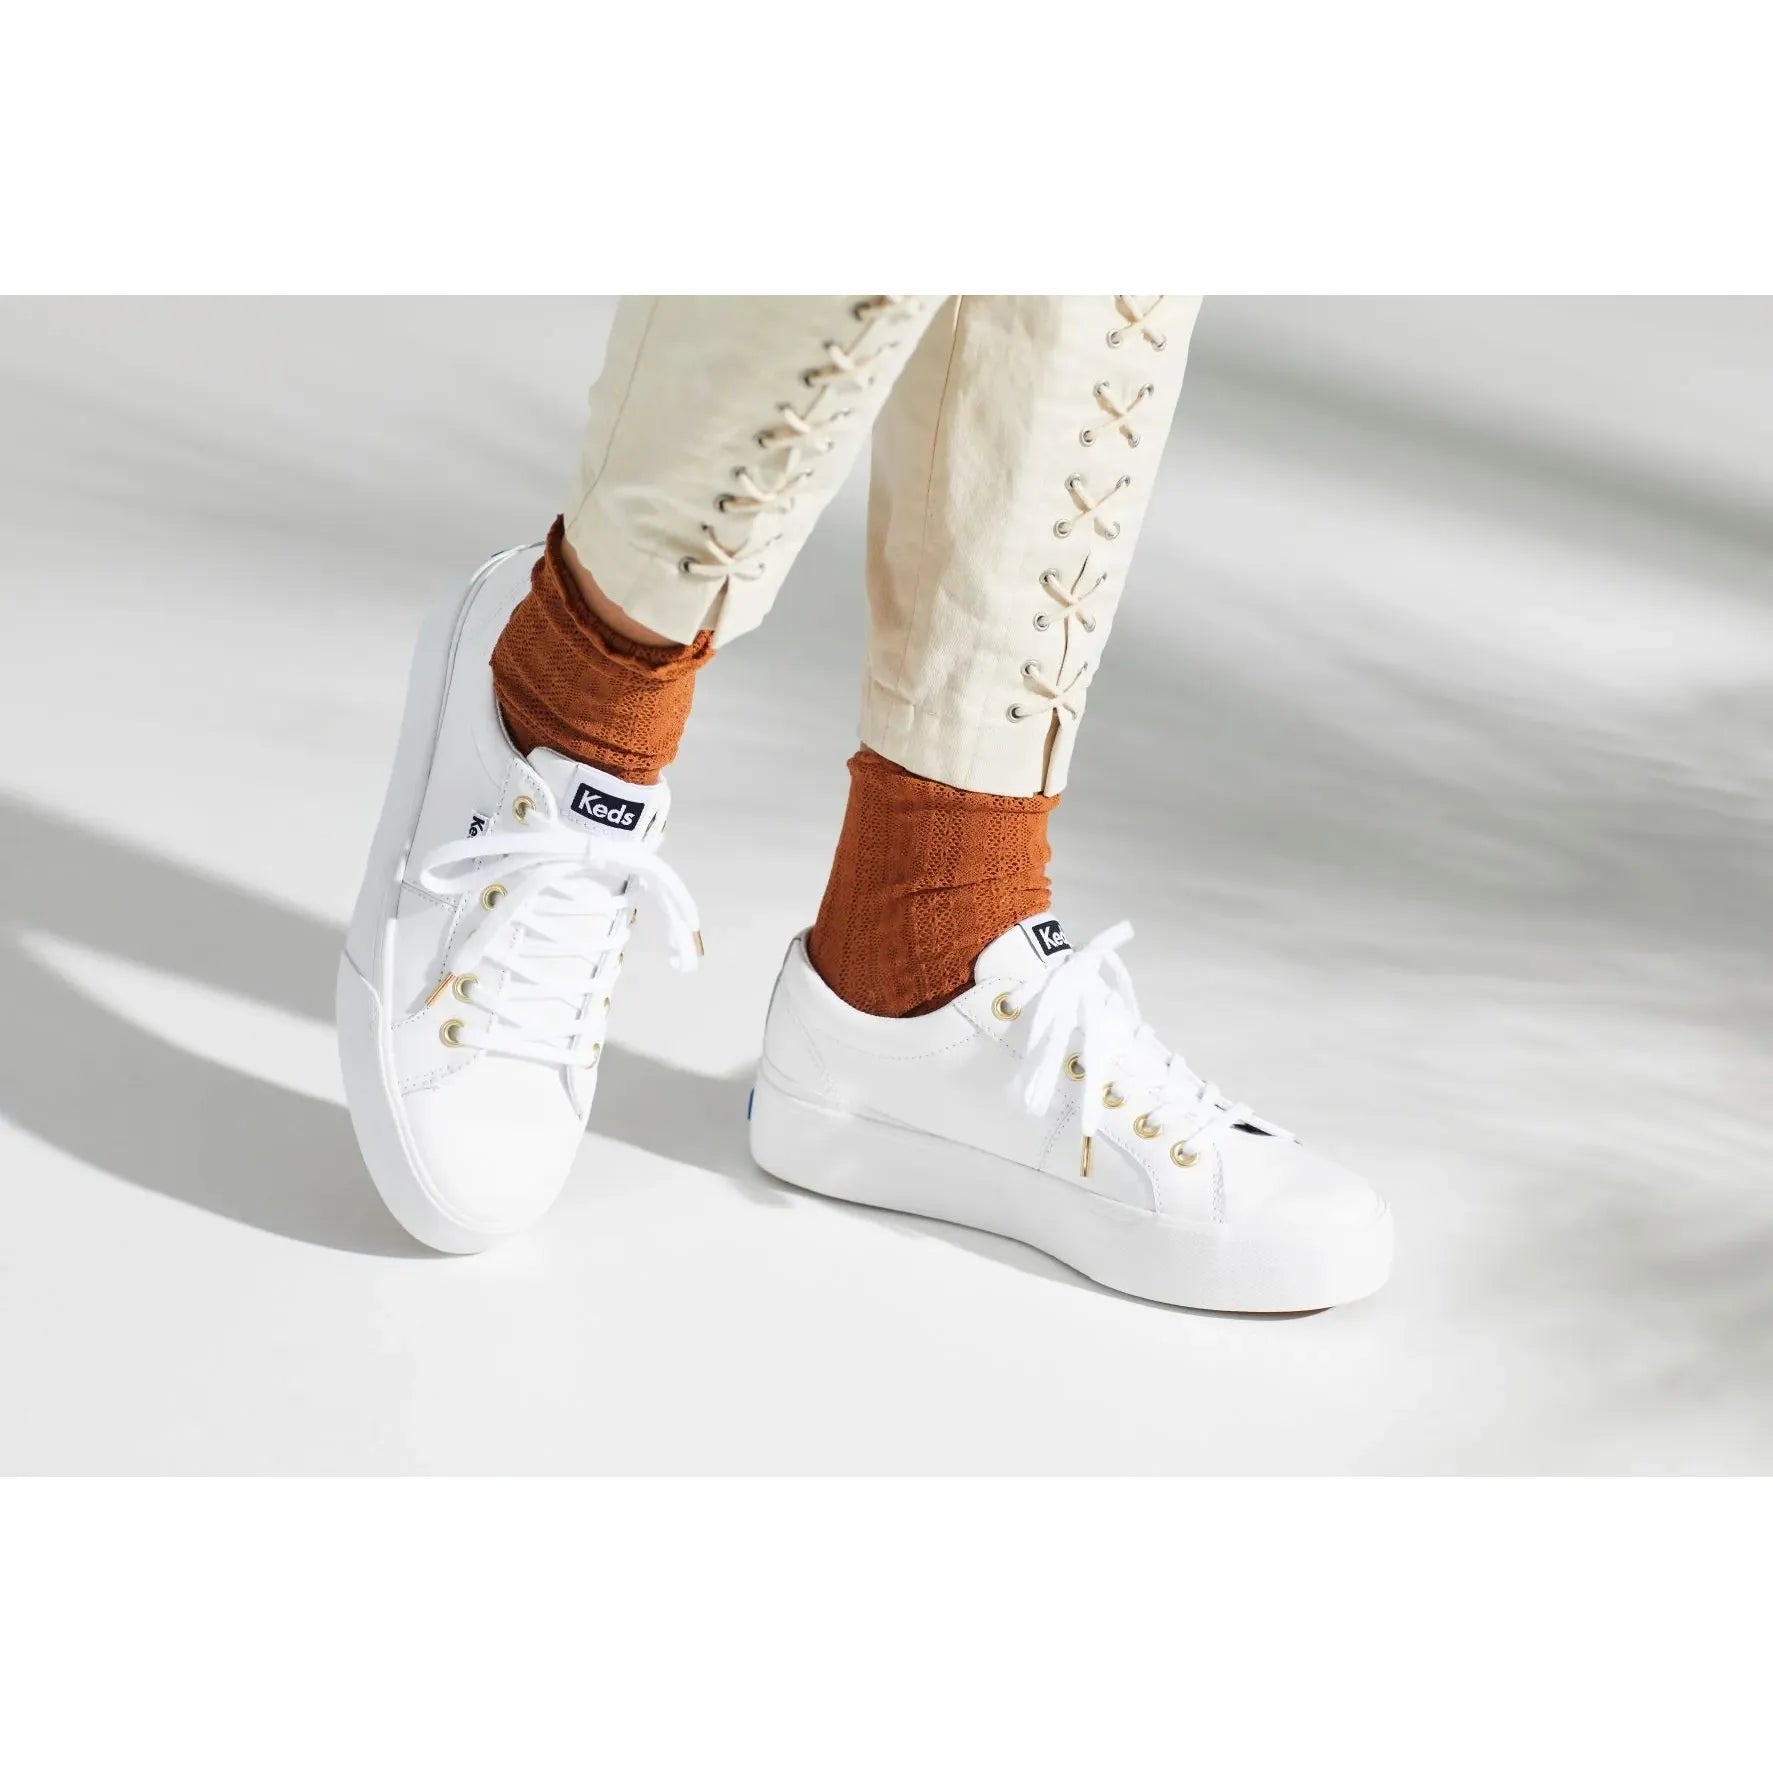 Jumpkick Duo Leather - White